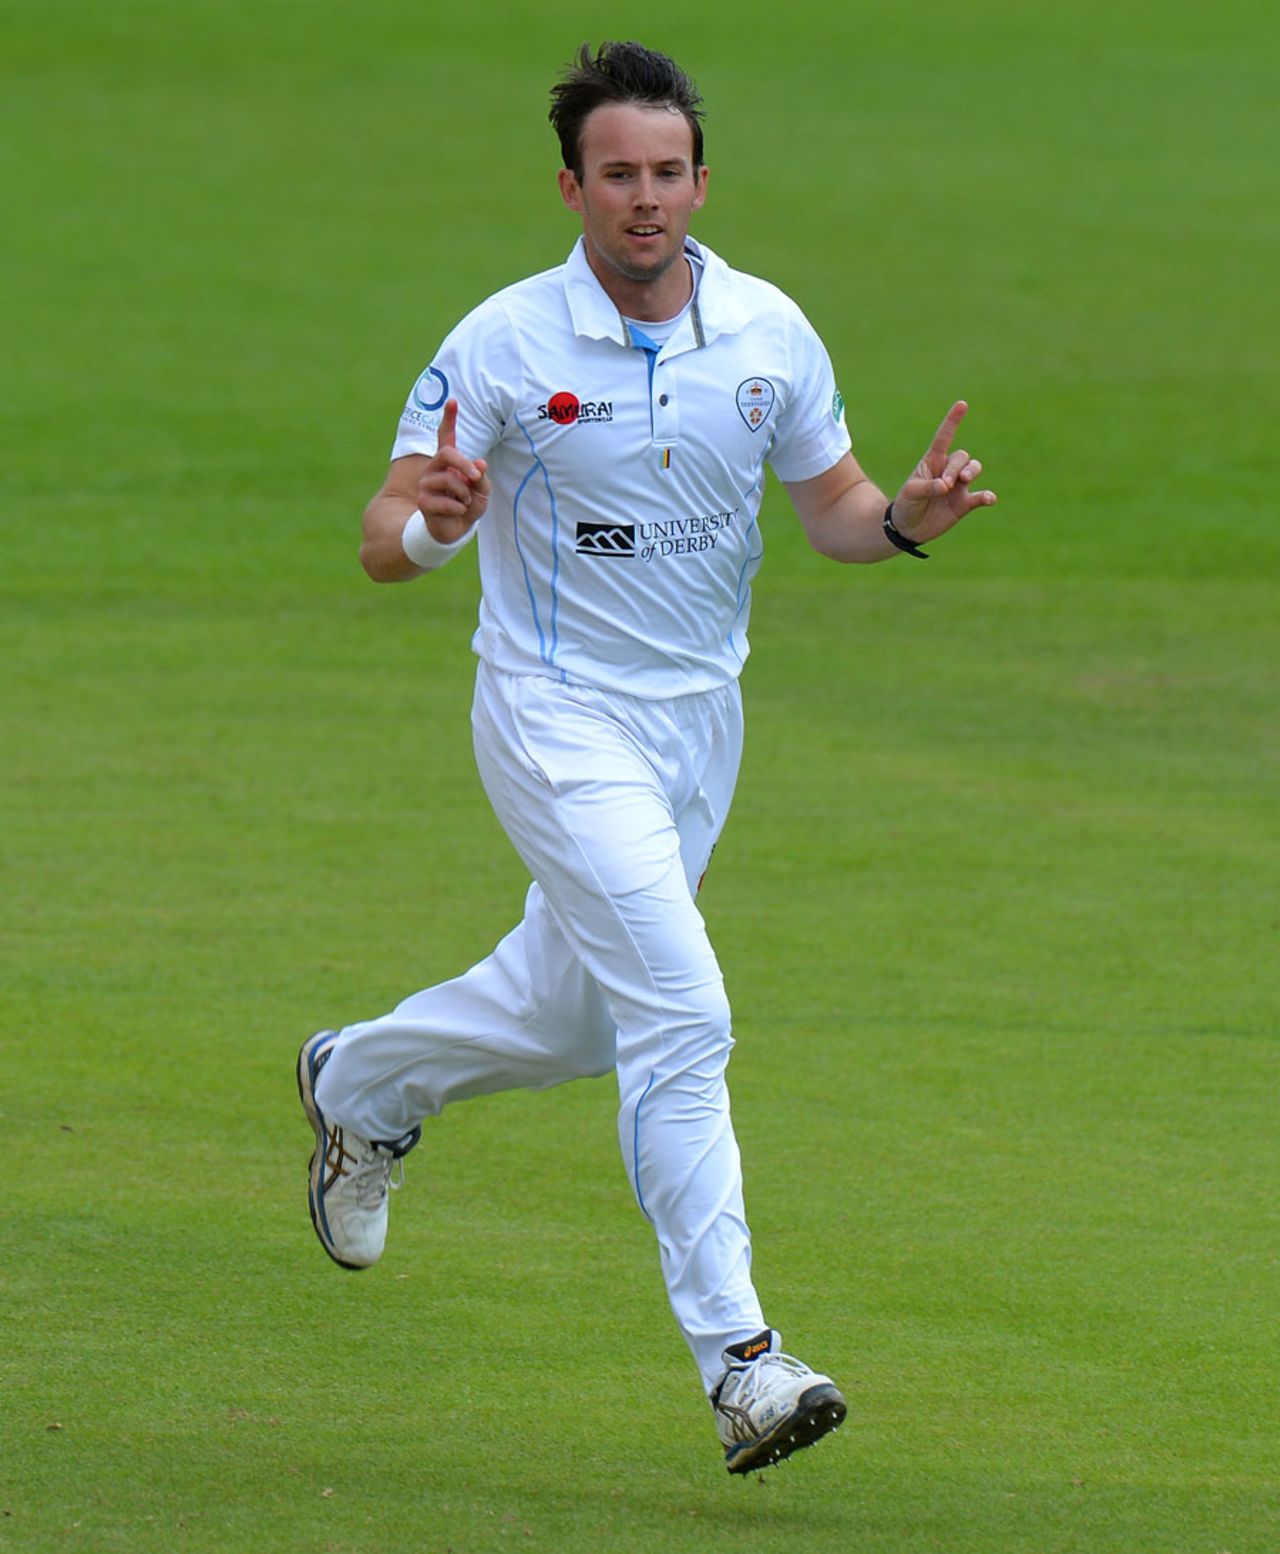 Tony Palladino picked up four wickets, Derbyshire v Worcestershire, County Championship, Division Two, Derby, 3rd day, June 22, 2016